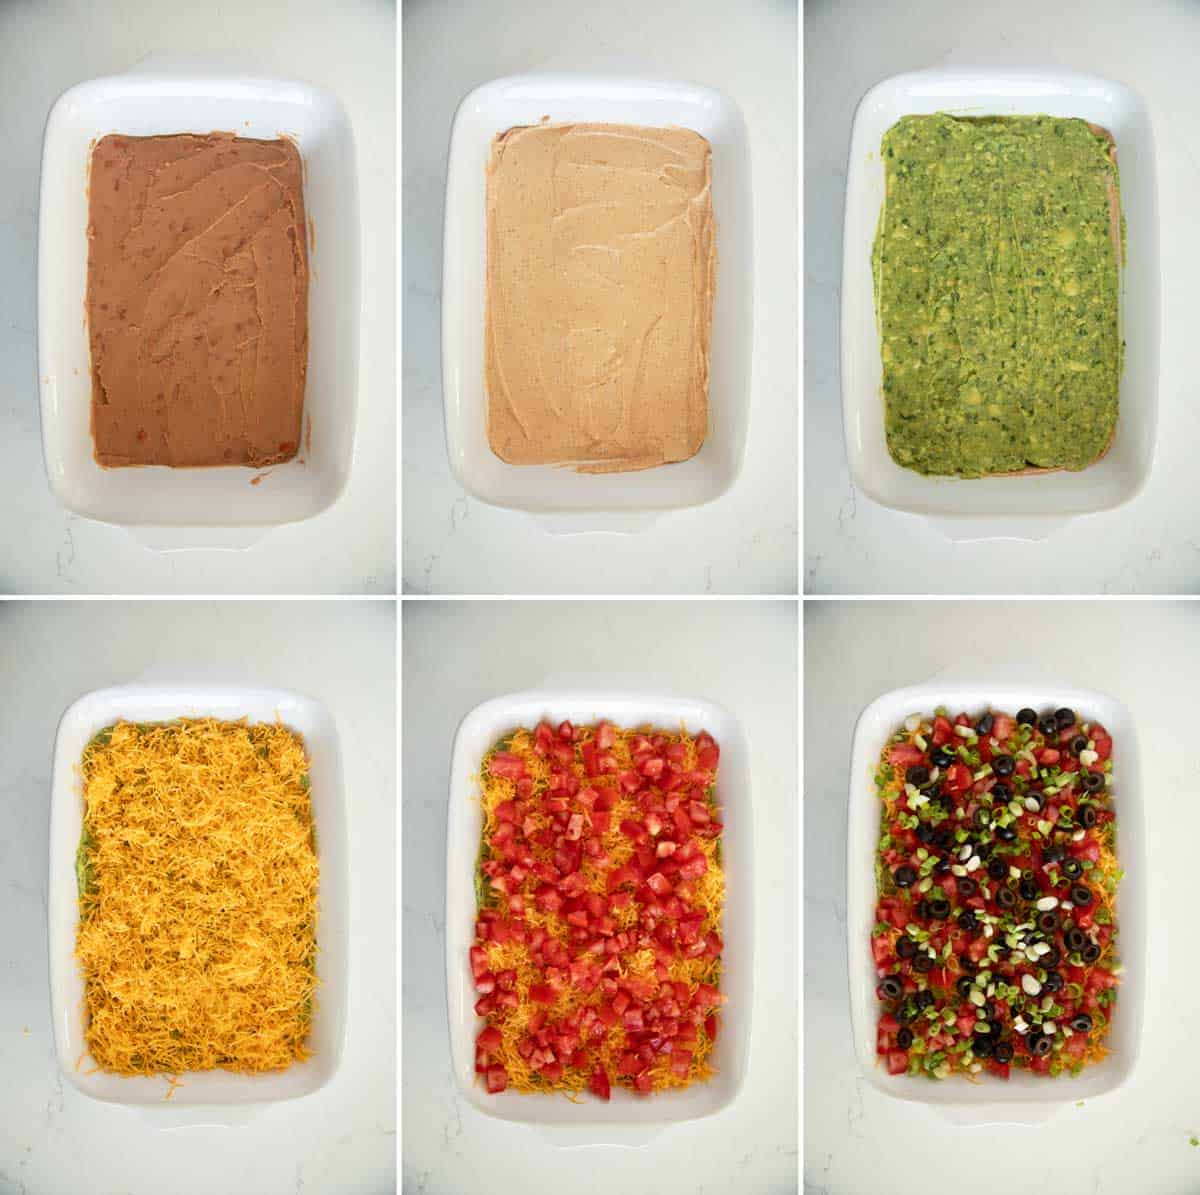 Assembling 7 Layer dip, showing all of the layers.